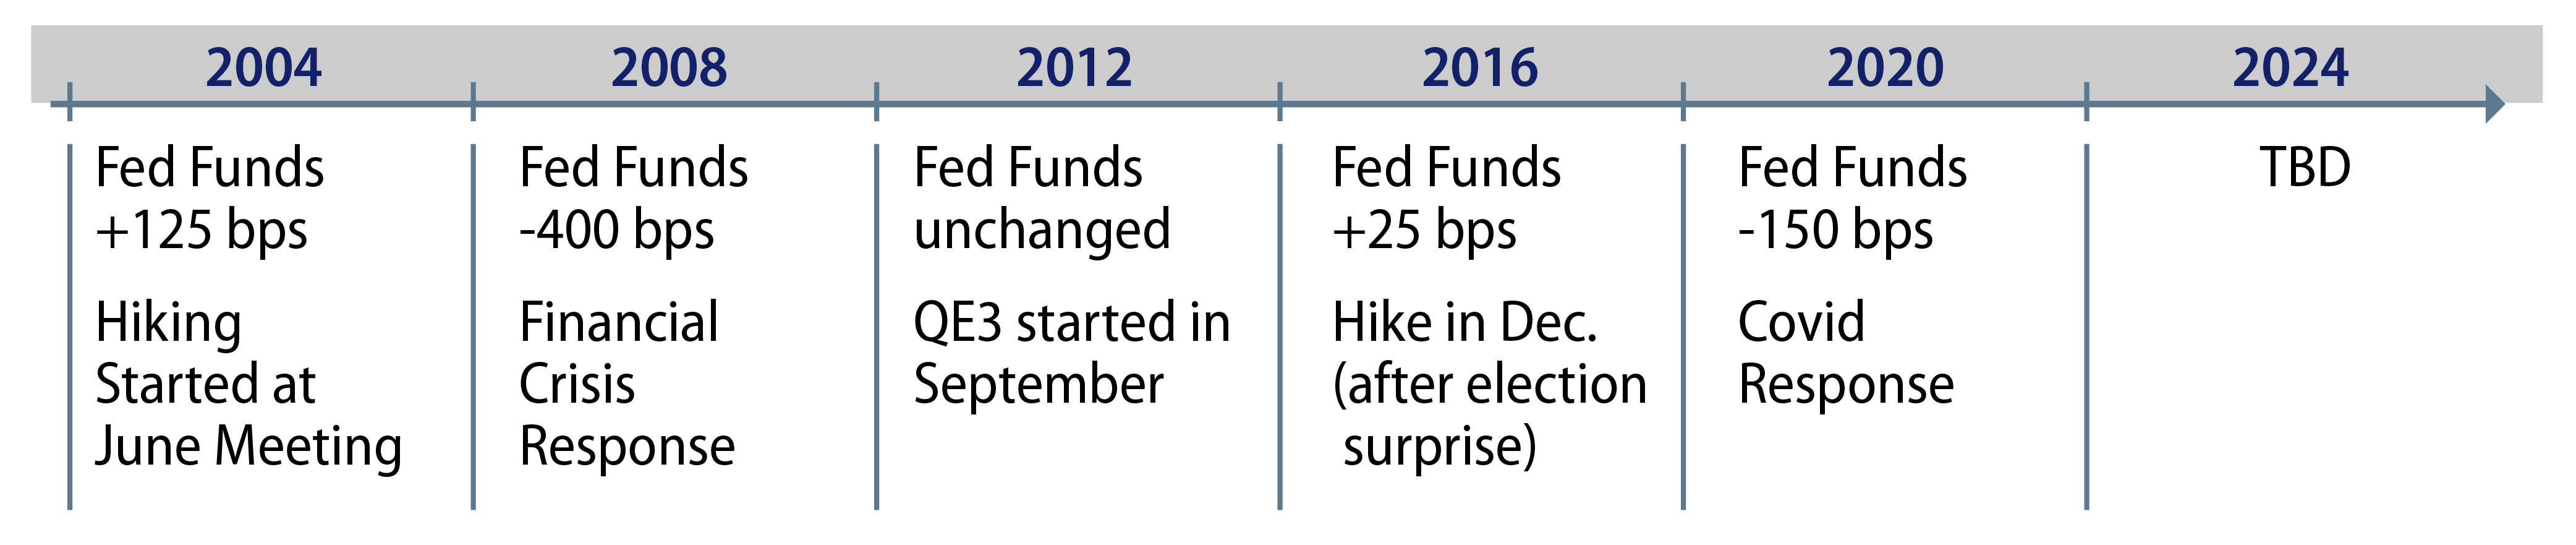 Explore Federal Reserve Policy Changes in Election Years, 2004-2020